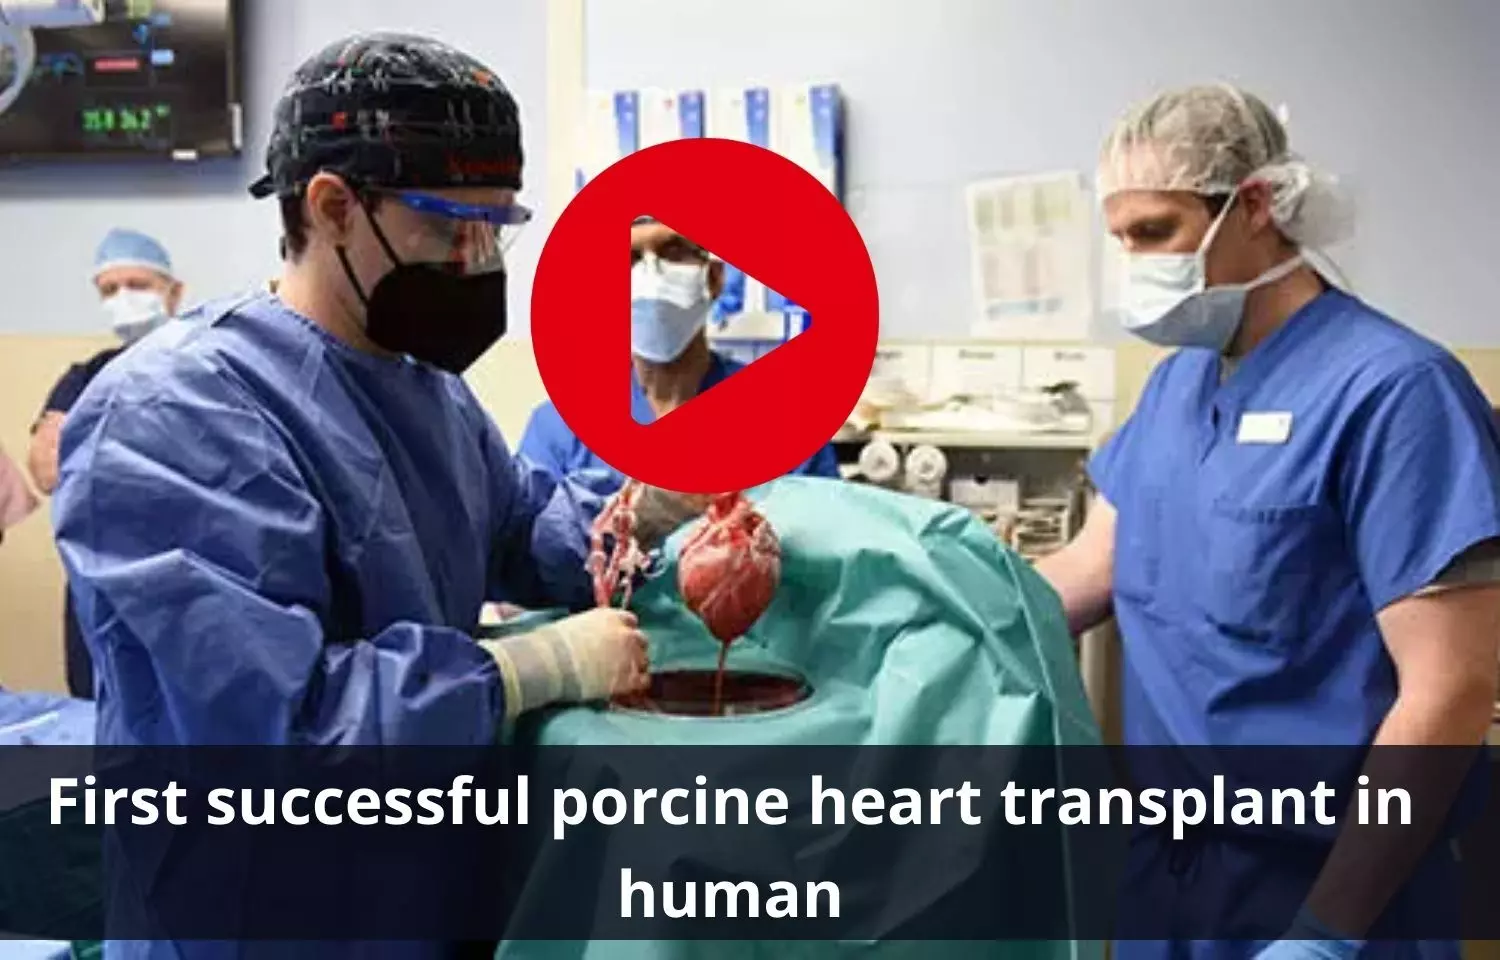 First successful Xenotransplant: porcine heart transplant in human